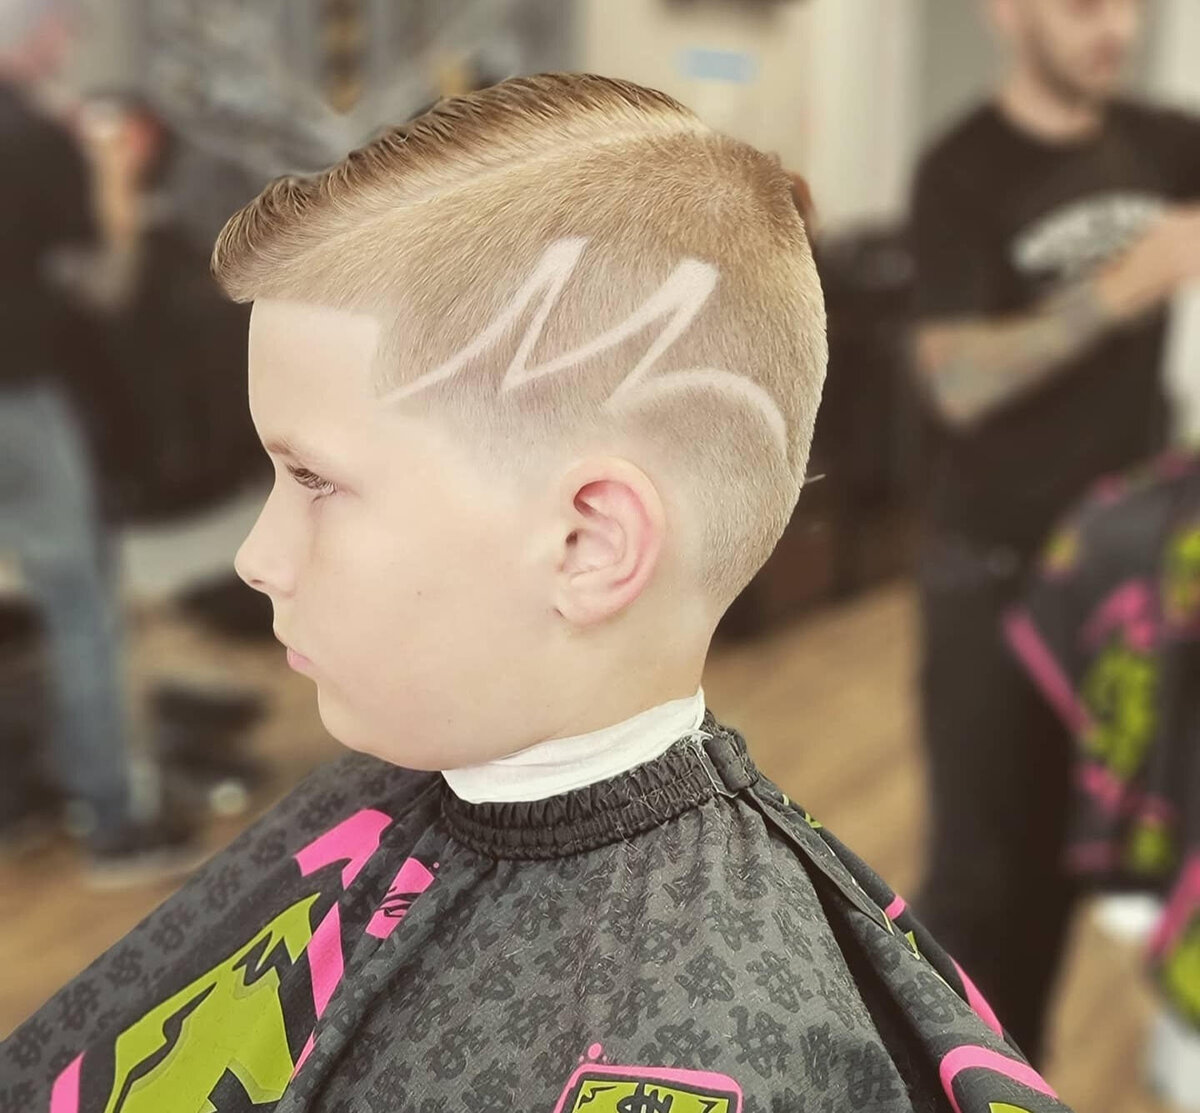 Kids Fade - Boy's Haircut at Whos Your Barber in Venice Florida